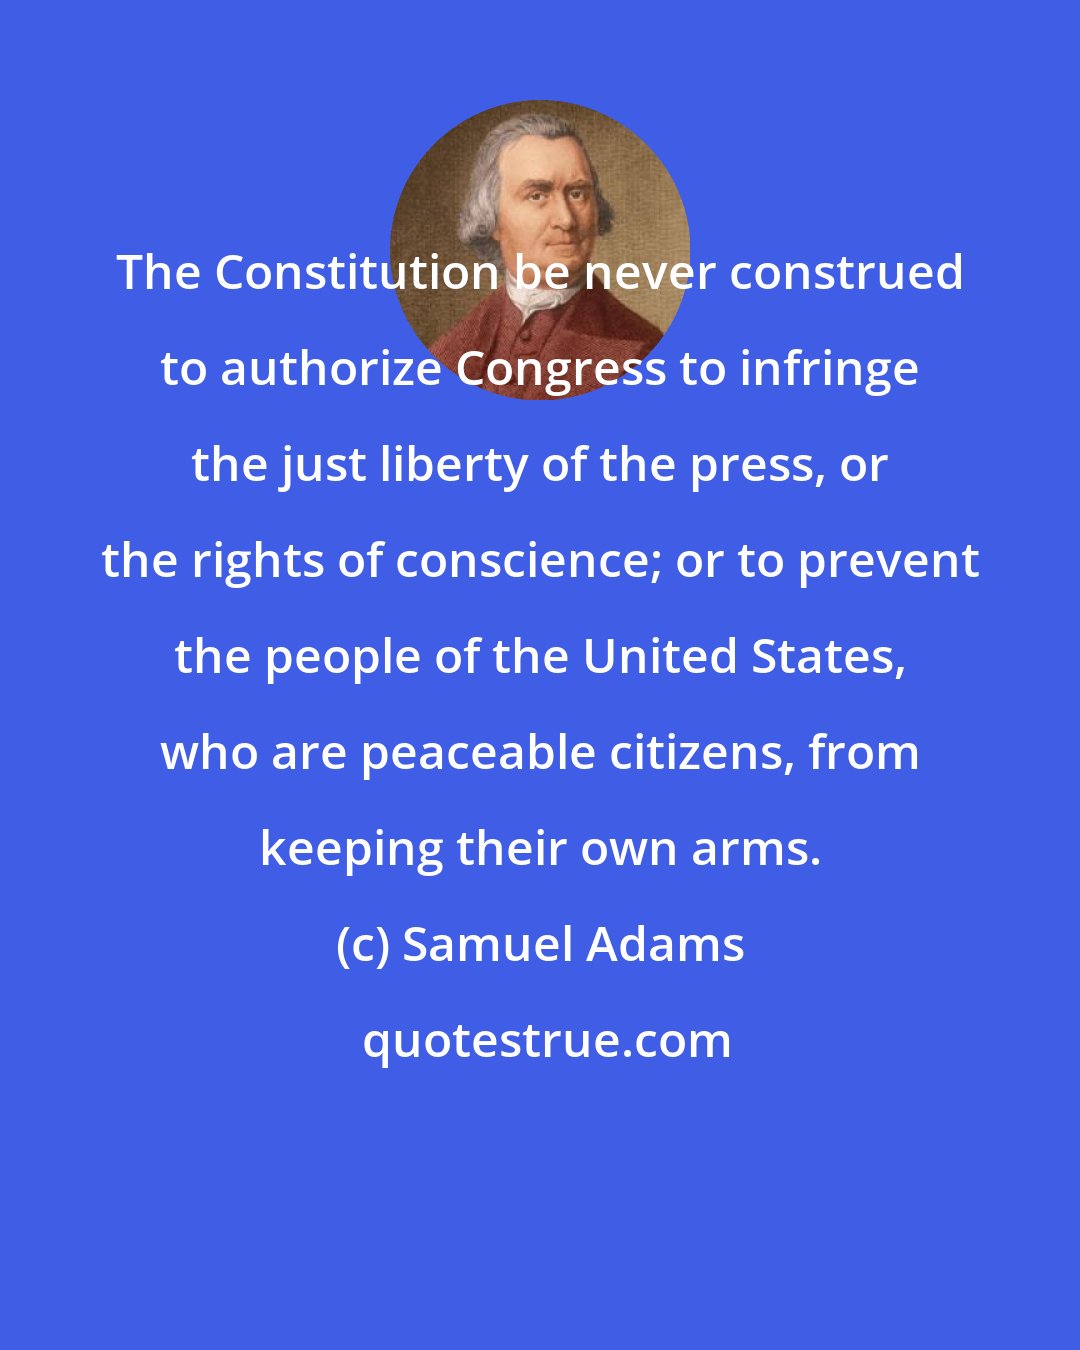 Samuel Adams: The Constitution be never construed to authorize Congress to infringe the just liberty of the press, or the rights of conscience; or to prevent the people of the United States, who are peaceable citizens, from keeping their own arms.